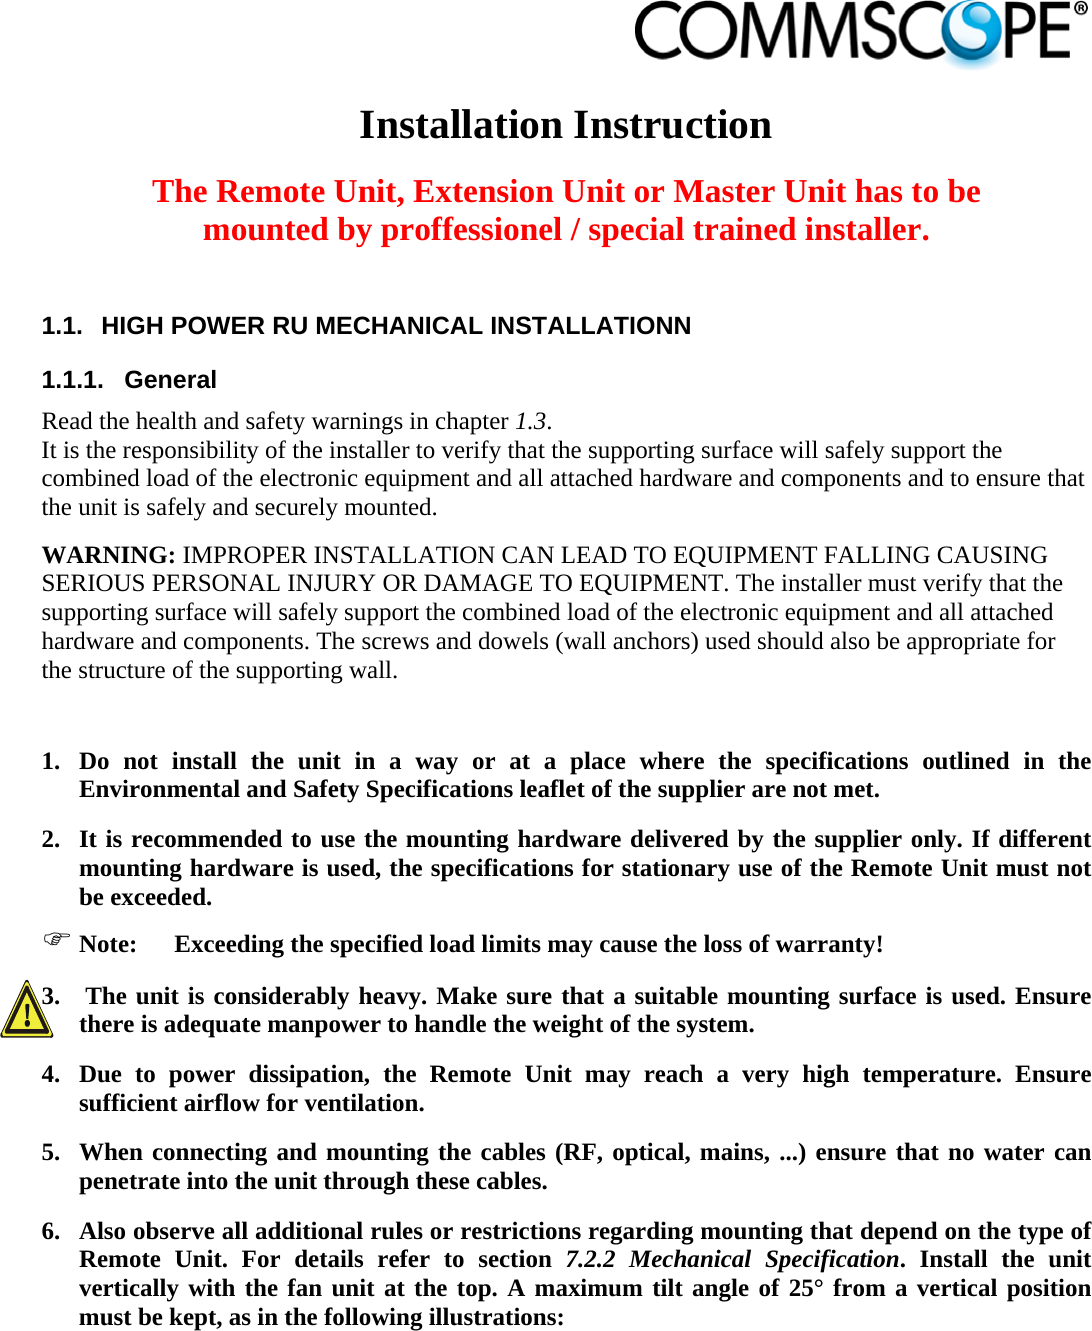                             Installation Instruction  The Remote Unit, Extension Unit or Master Unit has to be mounted by proffessionel / special trained installer.  1.1.  HIGH POWER RU MECHANICAL INSTALLATIONN 1.1.1. General Read the health and safety warnings in chapter 1.3. It is the responsibility of the installer to verify that the supporting surface will safely support the combined load of the electronic equipment and all attached hardware and components and to ensure that the unit is safely and securely mounted.  WARNING: IMPROPER INSTALLATION CAN LEAD TO EQUIPMENT FALLING CAUSING SERIOUS PERSONAL INJURY OR DAMAGE TO EQUIPMENT. The installer must verify that the supporting surface will safely support the combined load of the electronic equipment and all attached hardware and components. The screws and dowels (wall anchors) used should also be appropriate for the structure of the supporting wall.  1. Do not install the unit in a way or at a place where the specifications outlined in the Environmental and Safety Specifications leaflet of the supplier are not met. 2. It is recommended to use the mounting hardware delivered by the supplier only. If different mounting hardware is used, the specifications for stationary use of the Remote Unit must not be exceeded.  Note:  Exceeding the specified load limits may cause the loss of warranty! 3.  The unit is considerably heavy. Make sure that a suitable mounting surface is used. Ensure there is adequate manpower to handle the weight of the system. 4. Due to power dissipation, the Remote Unit may reach a very high temperature. Ensure sufficient airflow for ventilation. 5. When connecting and mounting the cables (RF, optical, mains, ...) ensure that no water can penetrate into the unit through these cables. 6. Also observe all additional rules or restrictions regarding mounting that depend on the type of Remote Unit. For details refer to section 7.2.2 Mechanical Specification. Install the unit vertically with the fan unit at the top. A maximum tilt angle of 25° from a vertical position must be kept, as in the following illustrations: 